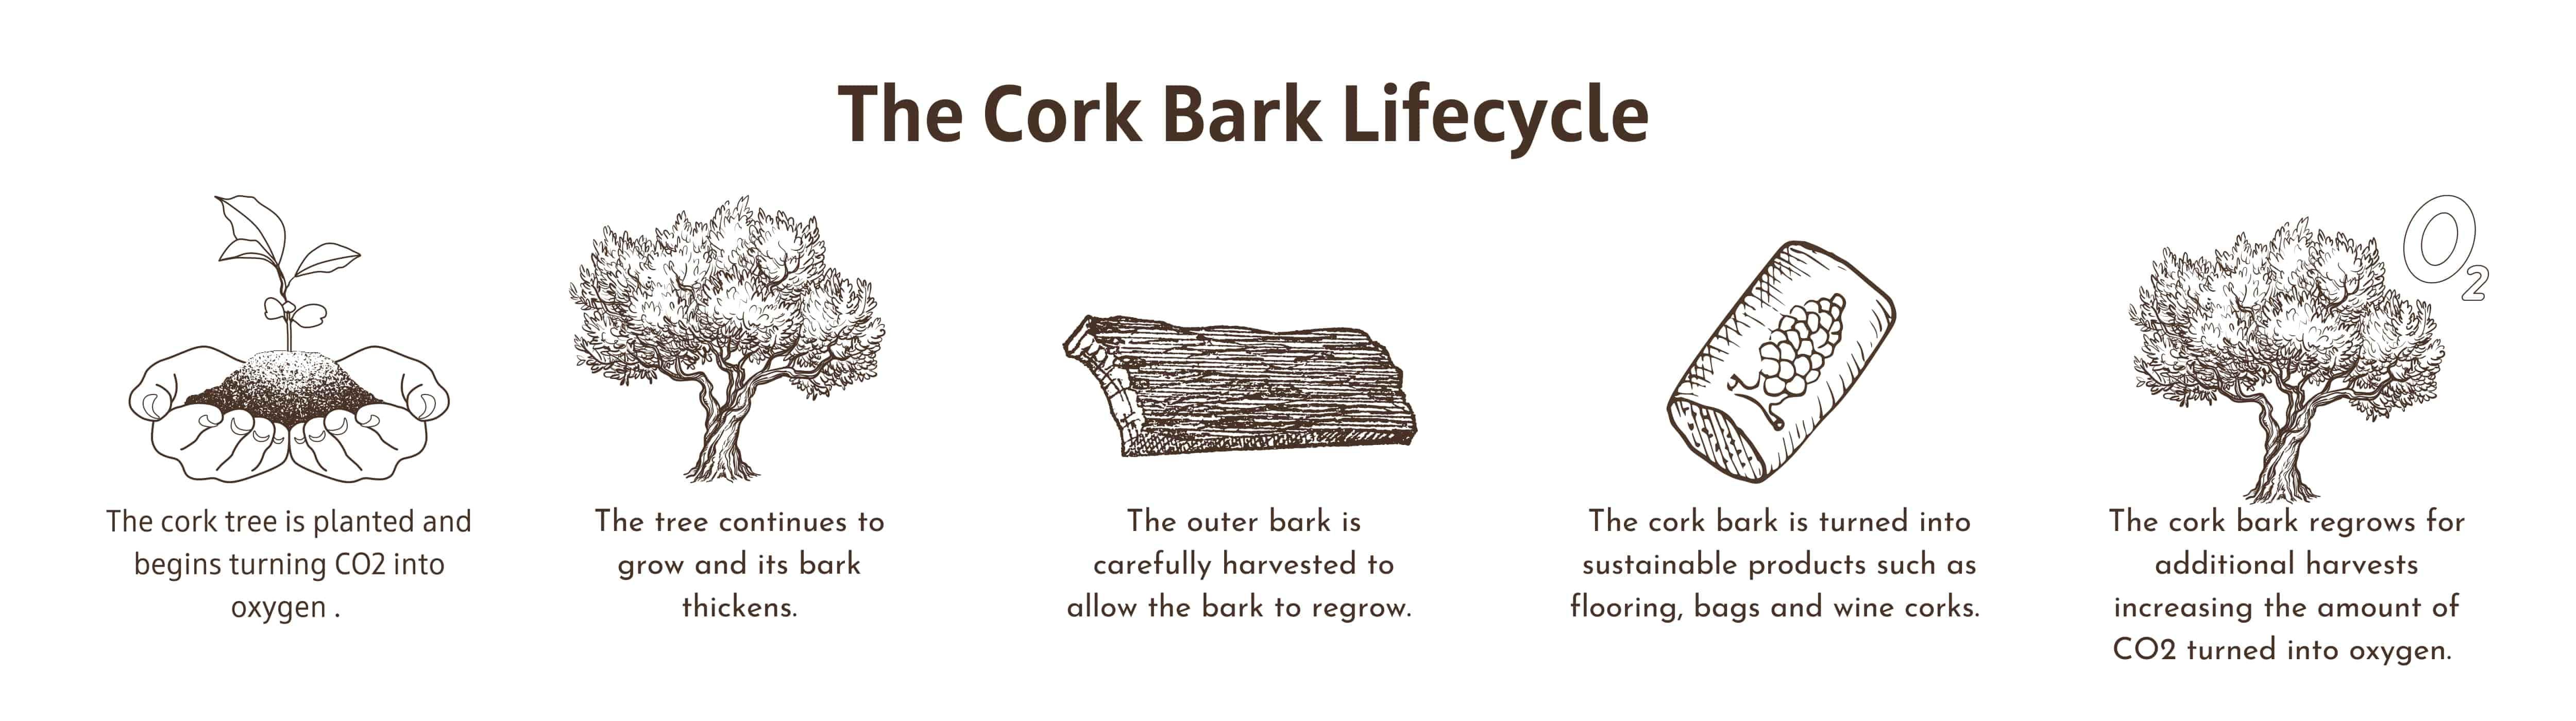 From acorn to tree to harvest to cork products to continued growth and harvest